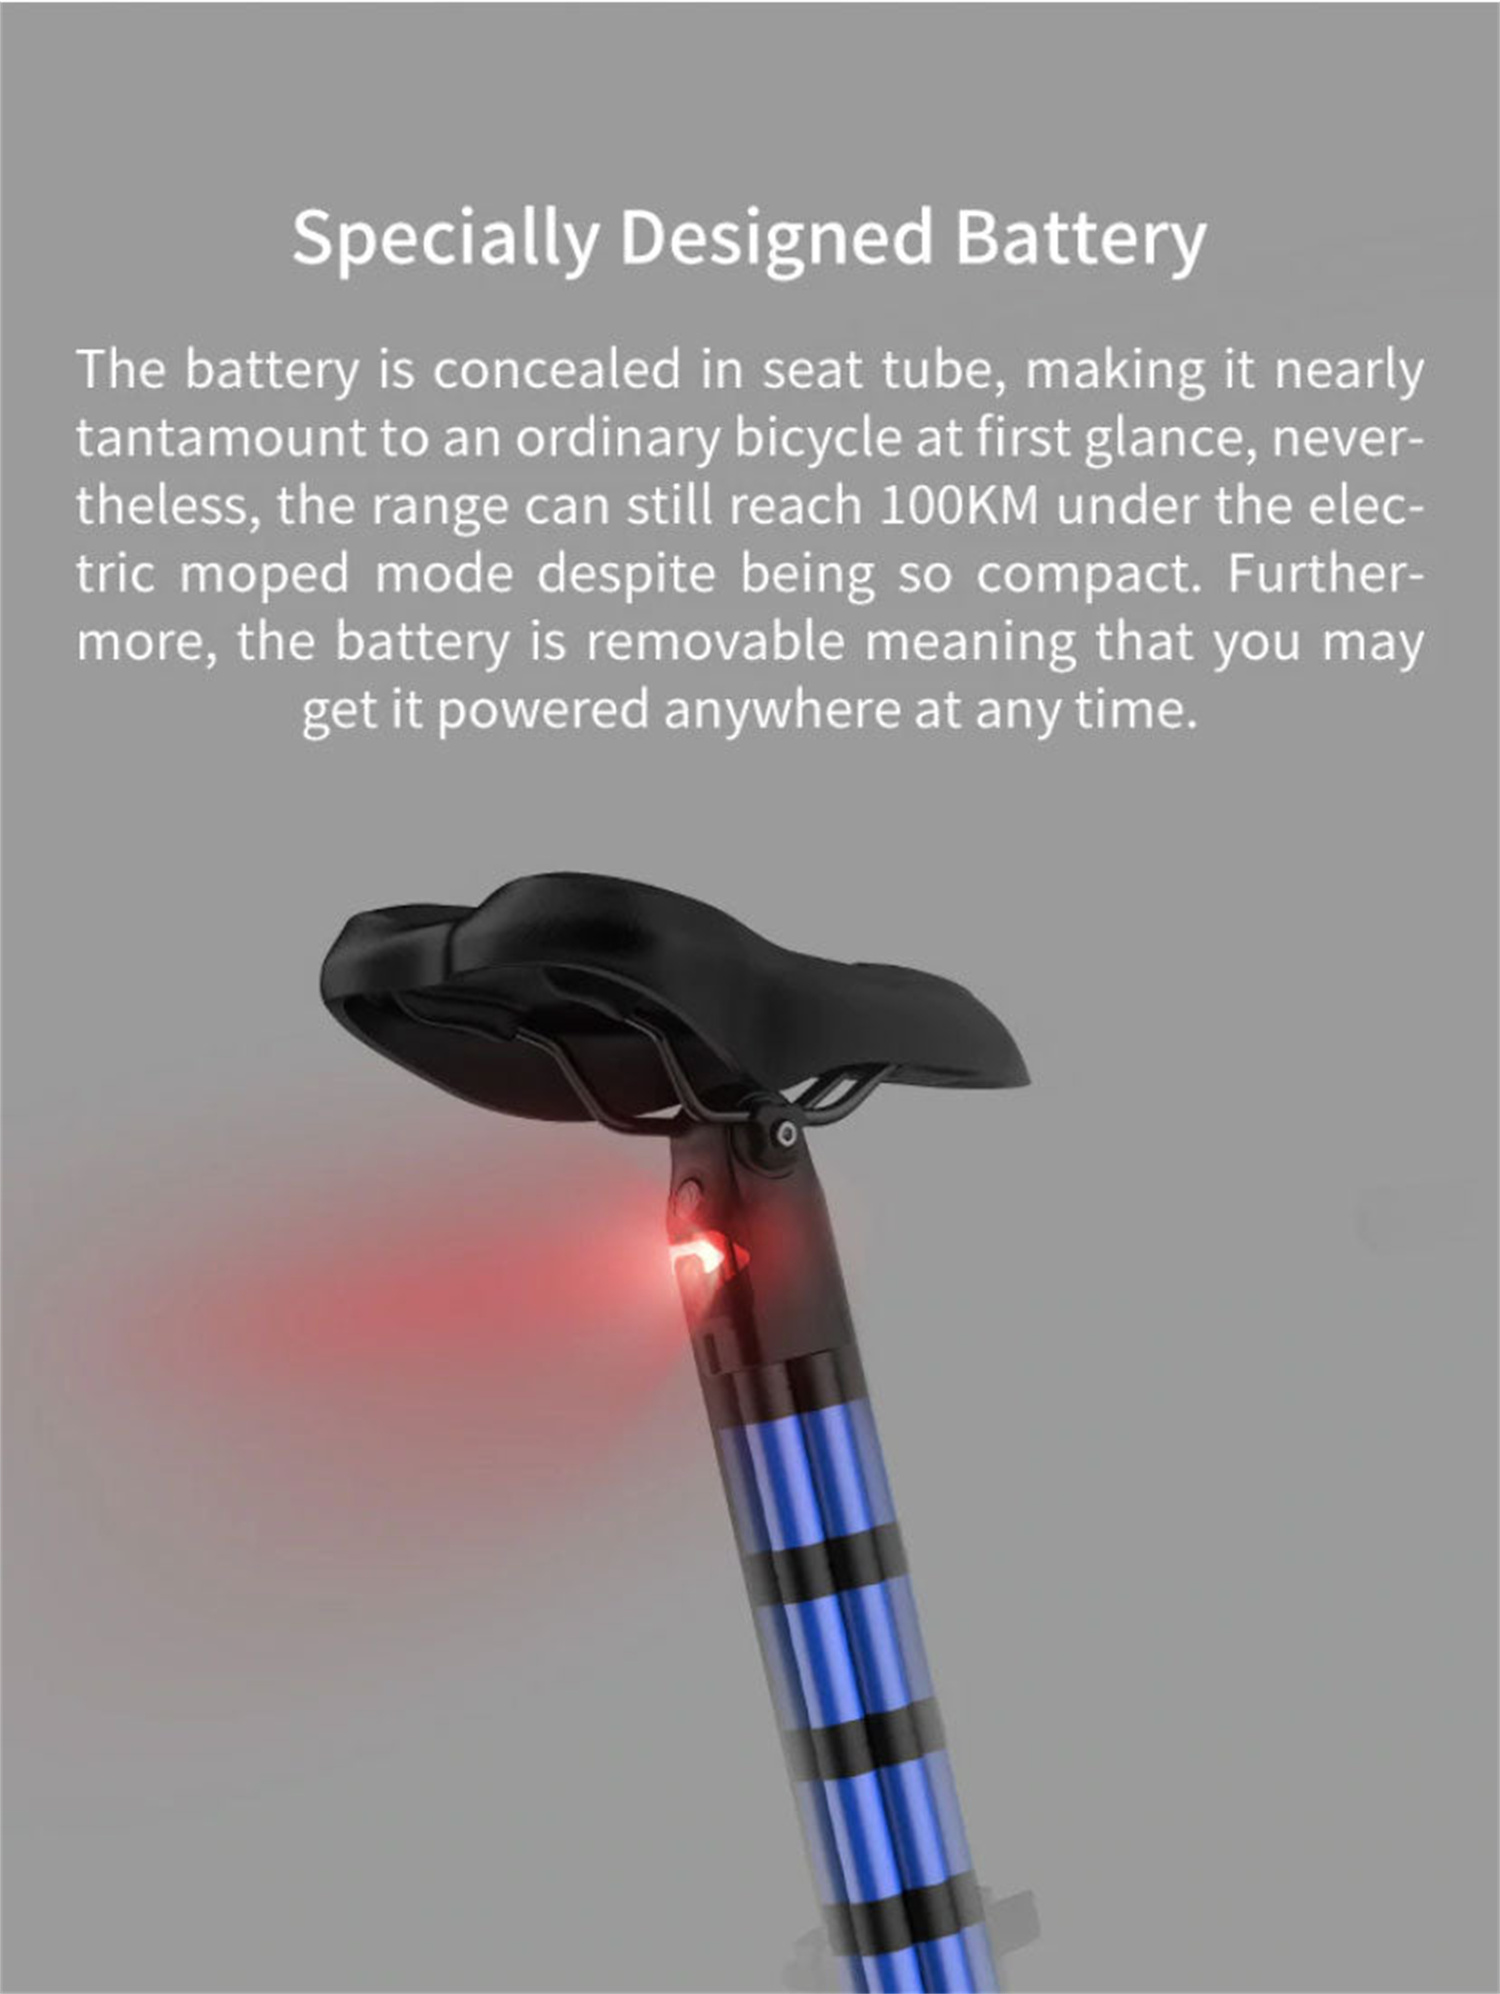 Specially Designed Battery